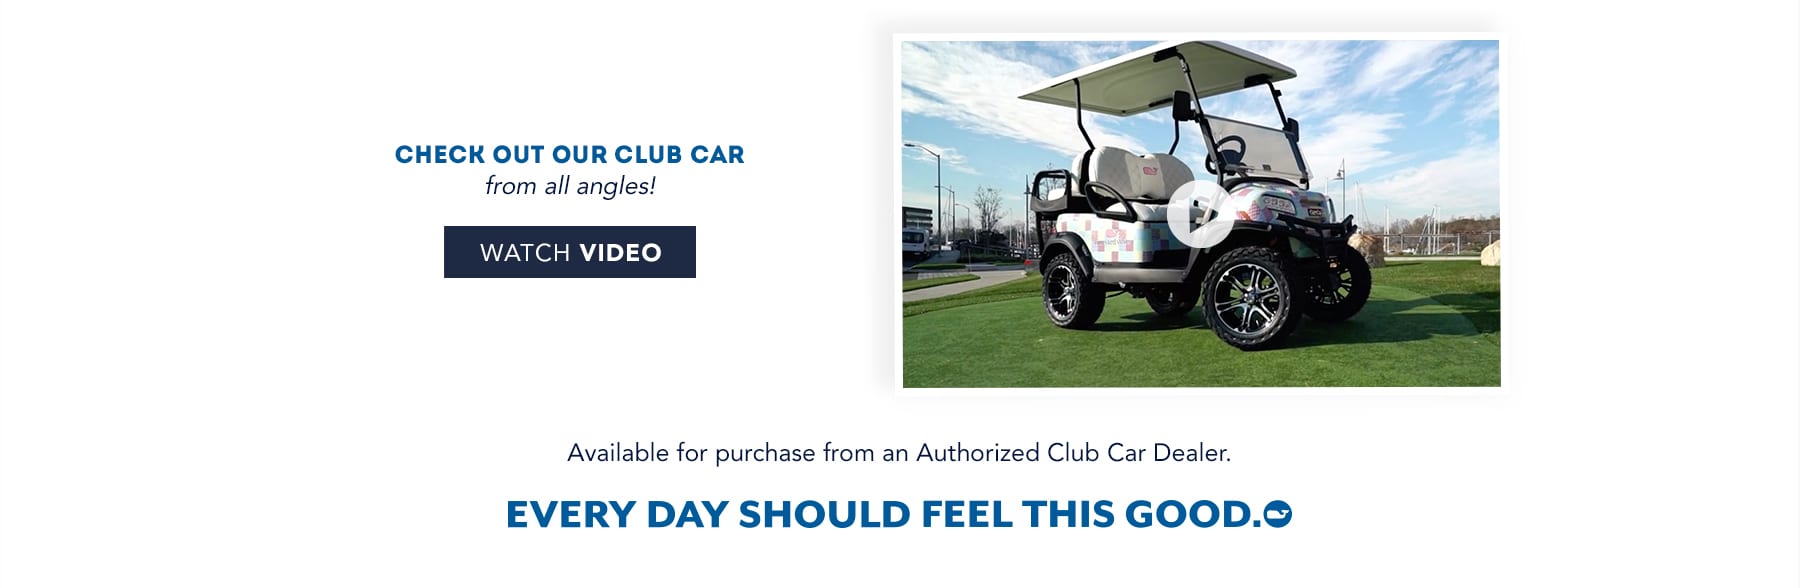 Check out our Club Car from all angles! What Video